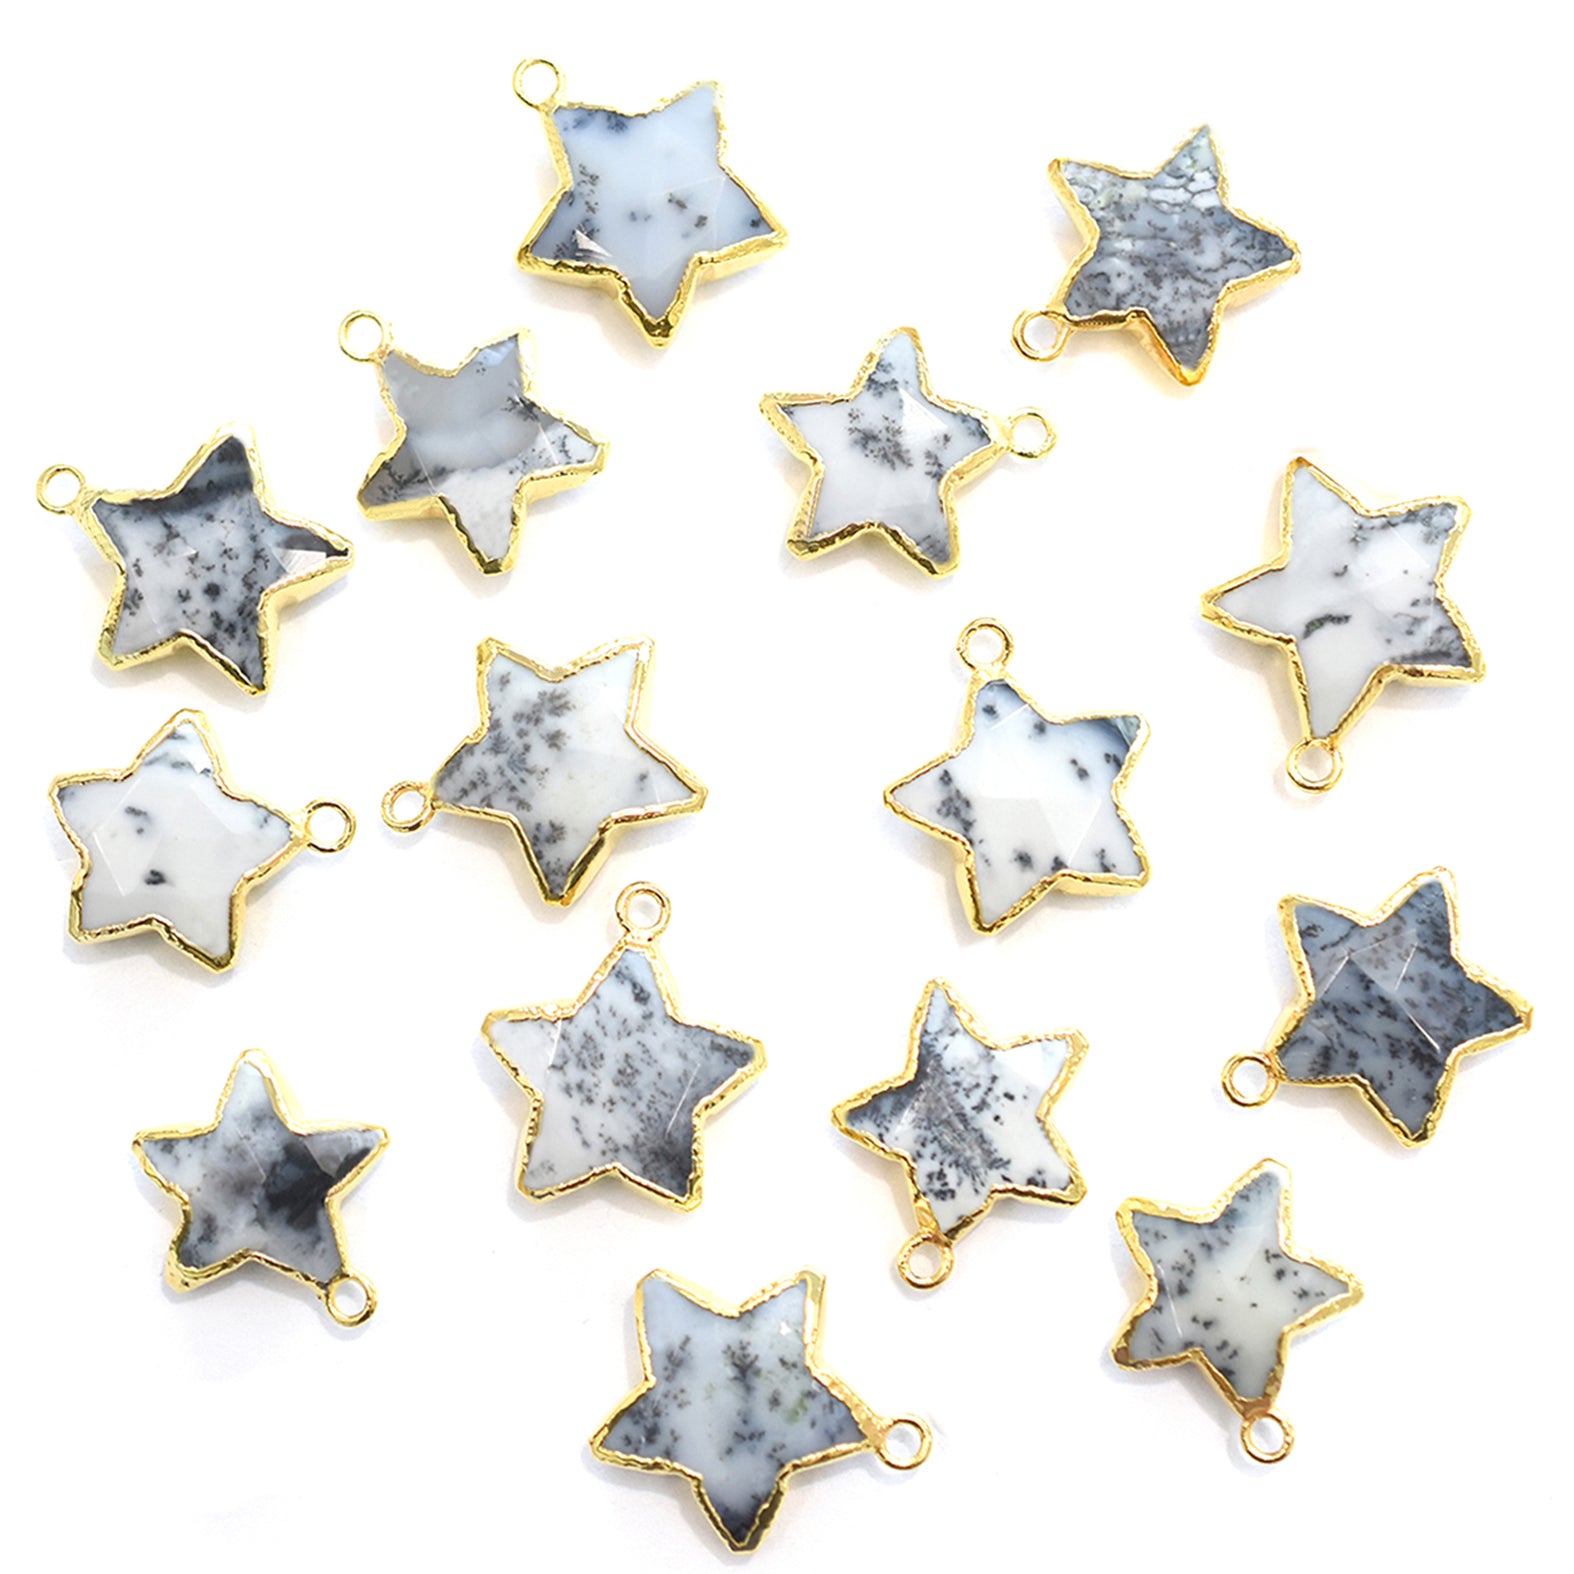 Dendritic Opal 10 To 11 MM Star Shape Gold Electroplated Pendant (Set Of 2 Pcs)